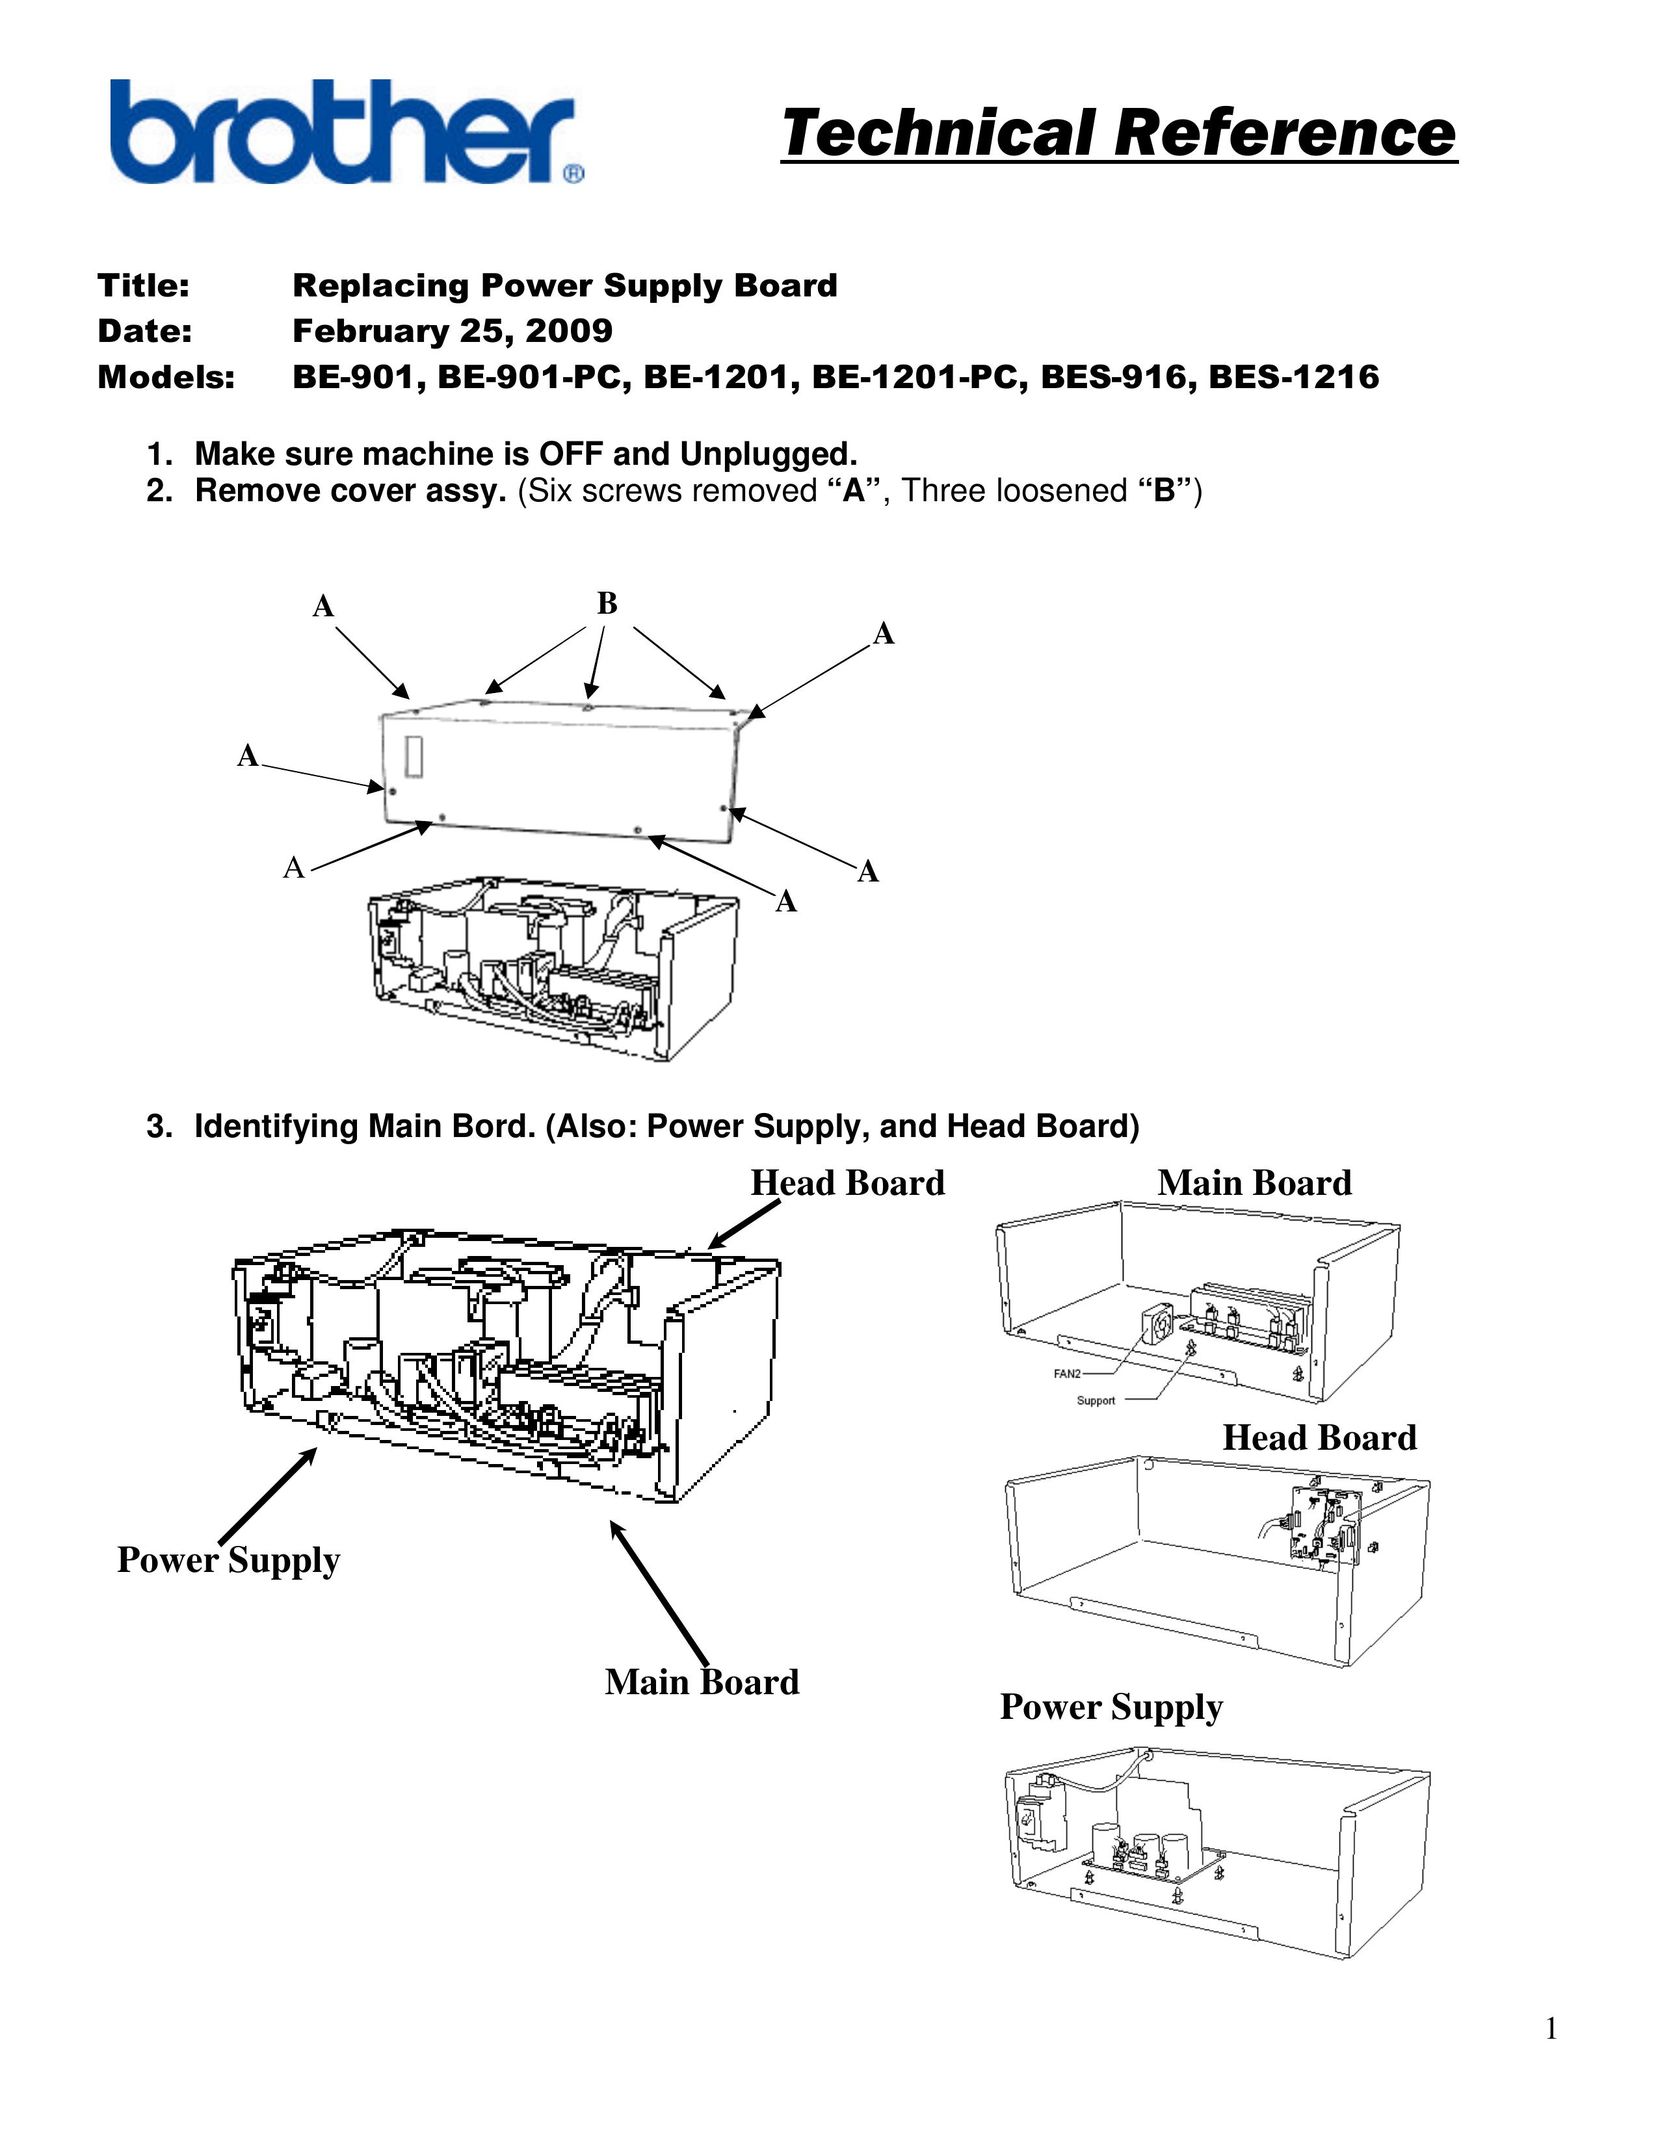 Brother BES-1216 Power Supply User Manual